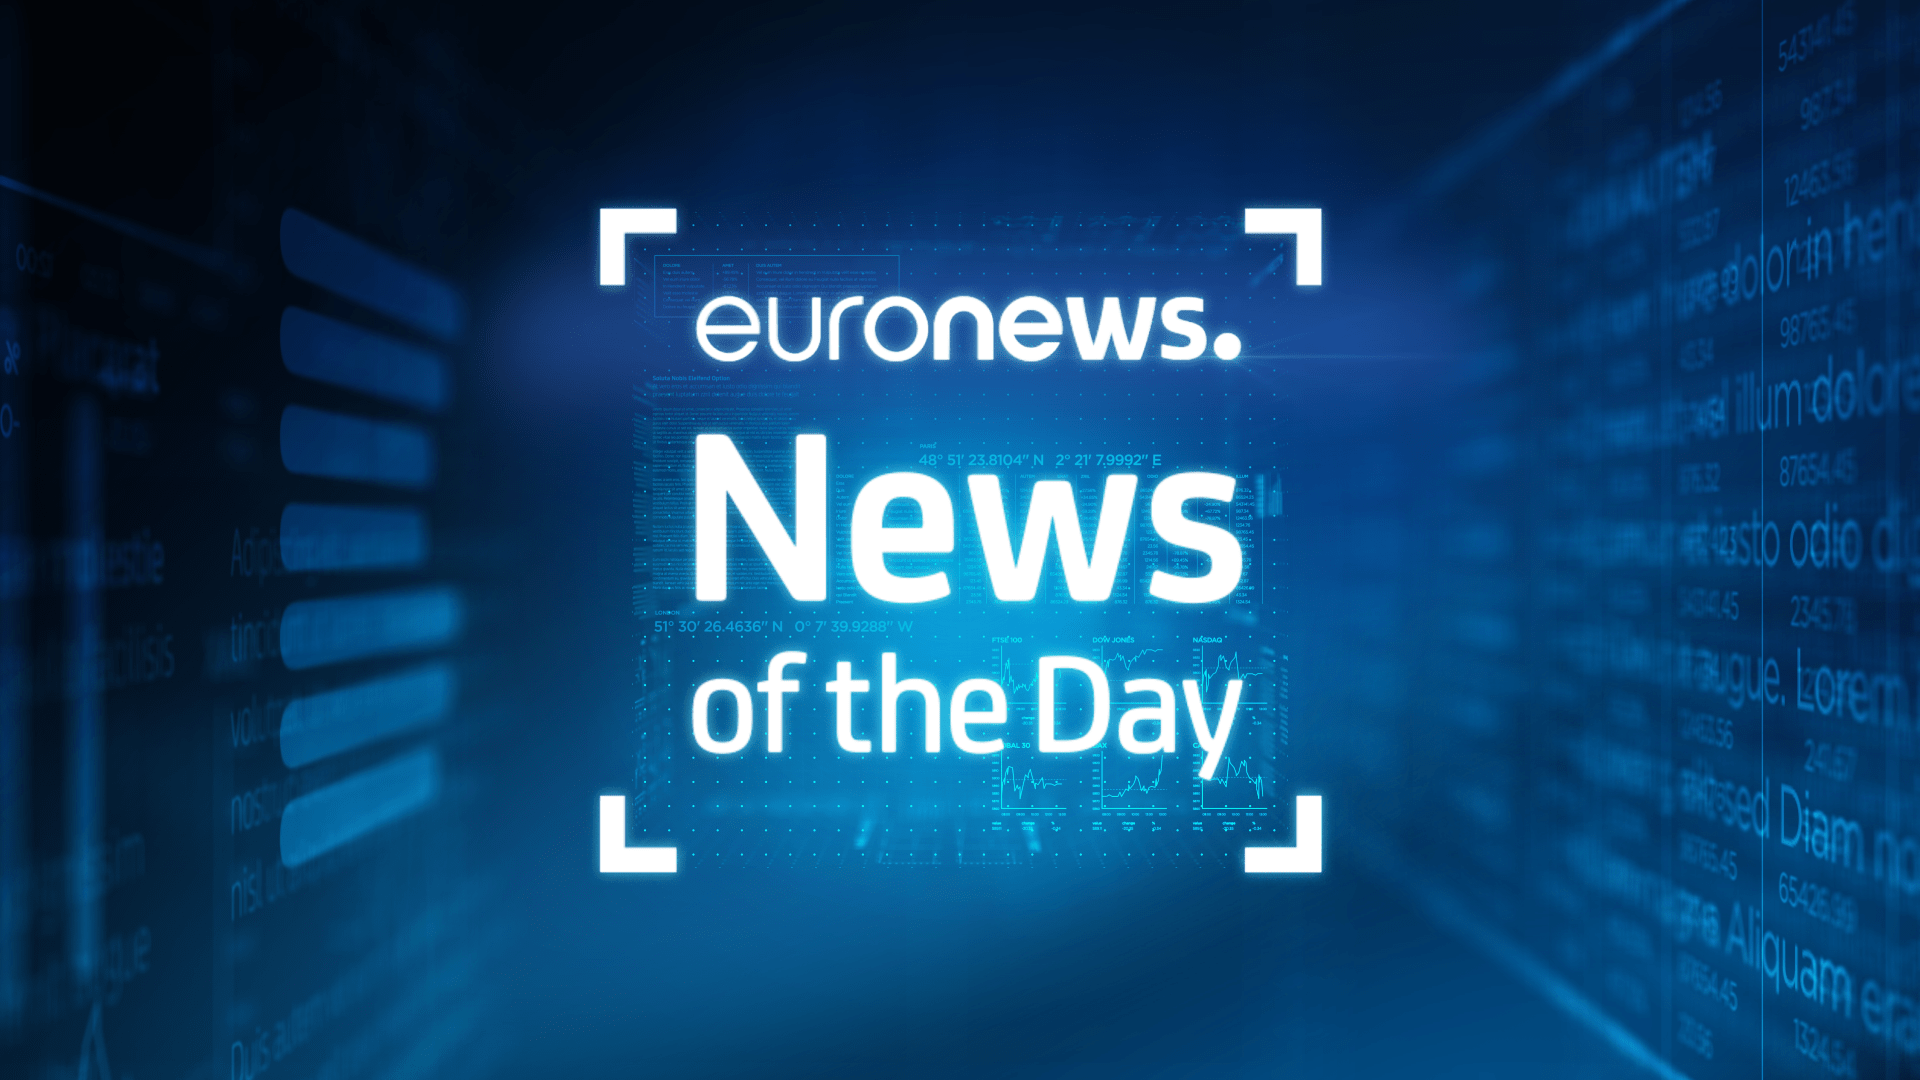 Euronews - News of the Day